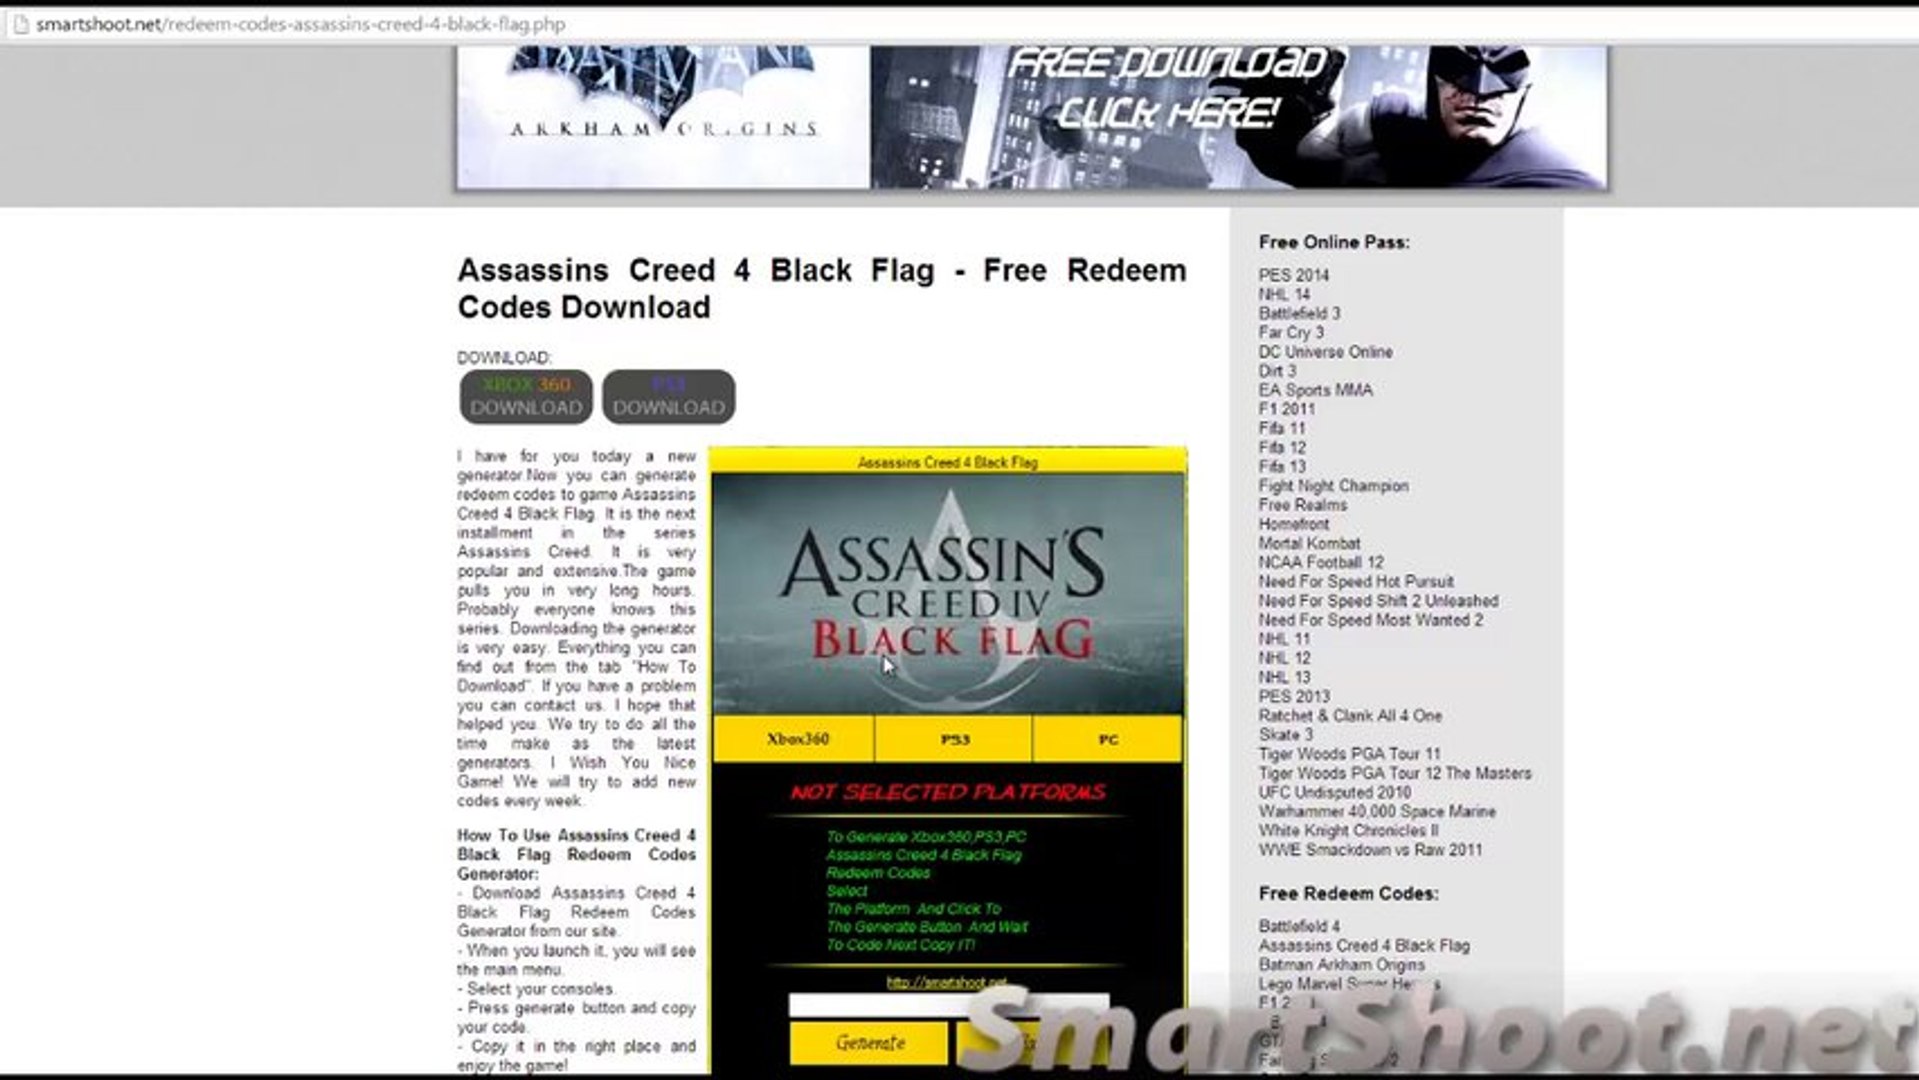 How To Get Assassins Creed IV Black Flag Redeem Codes [Xbox360,PS3] - video  Dailymotion